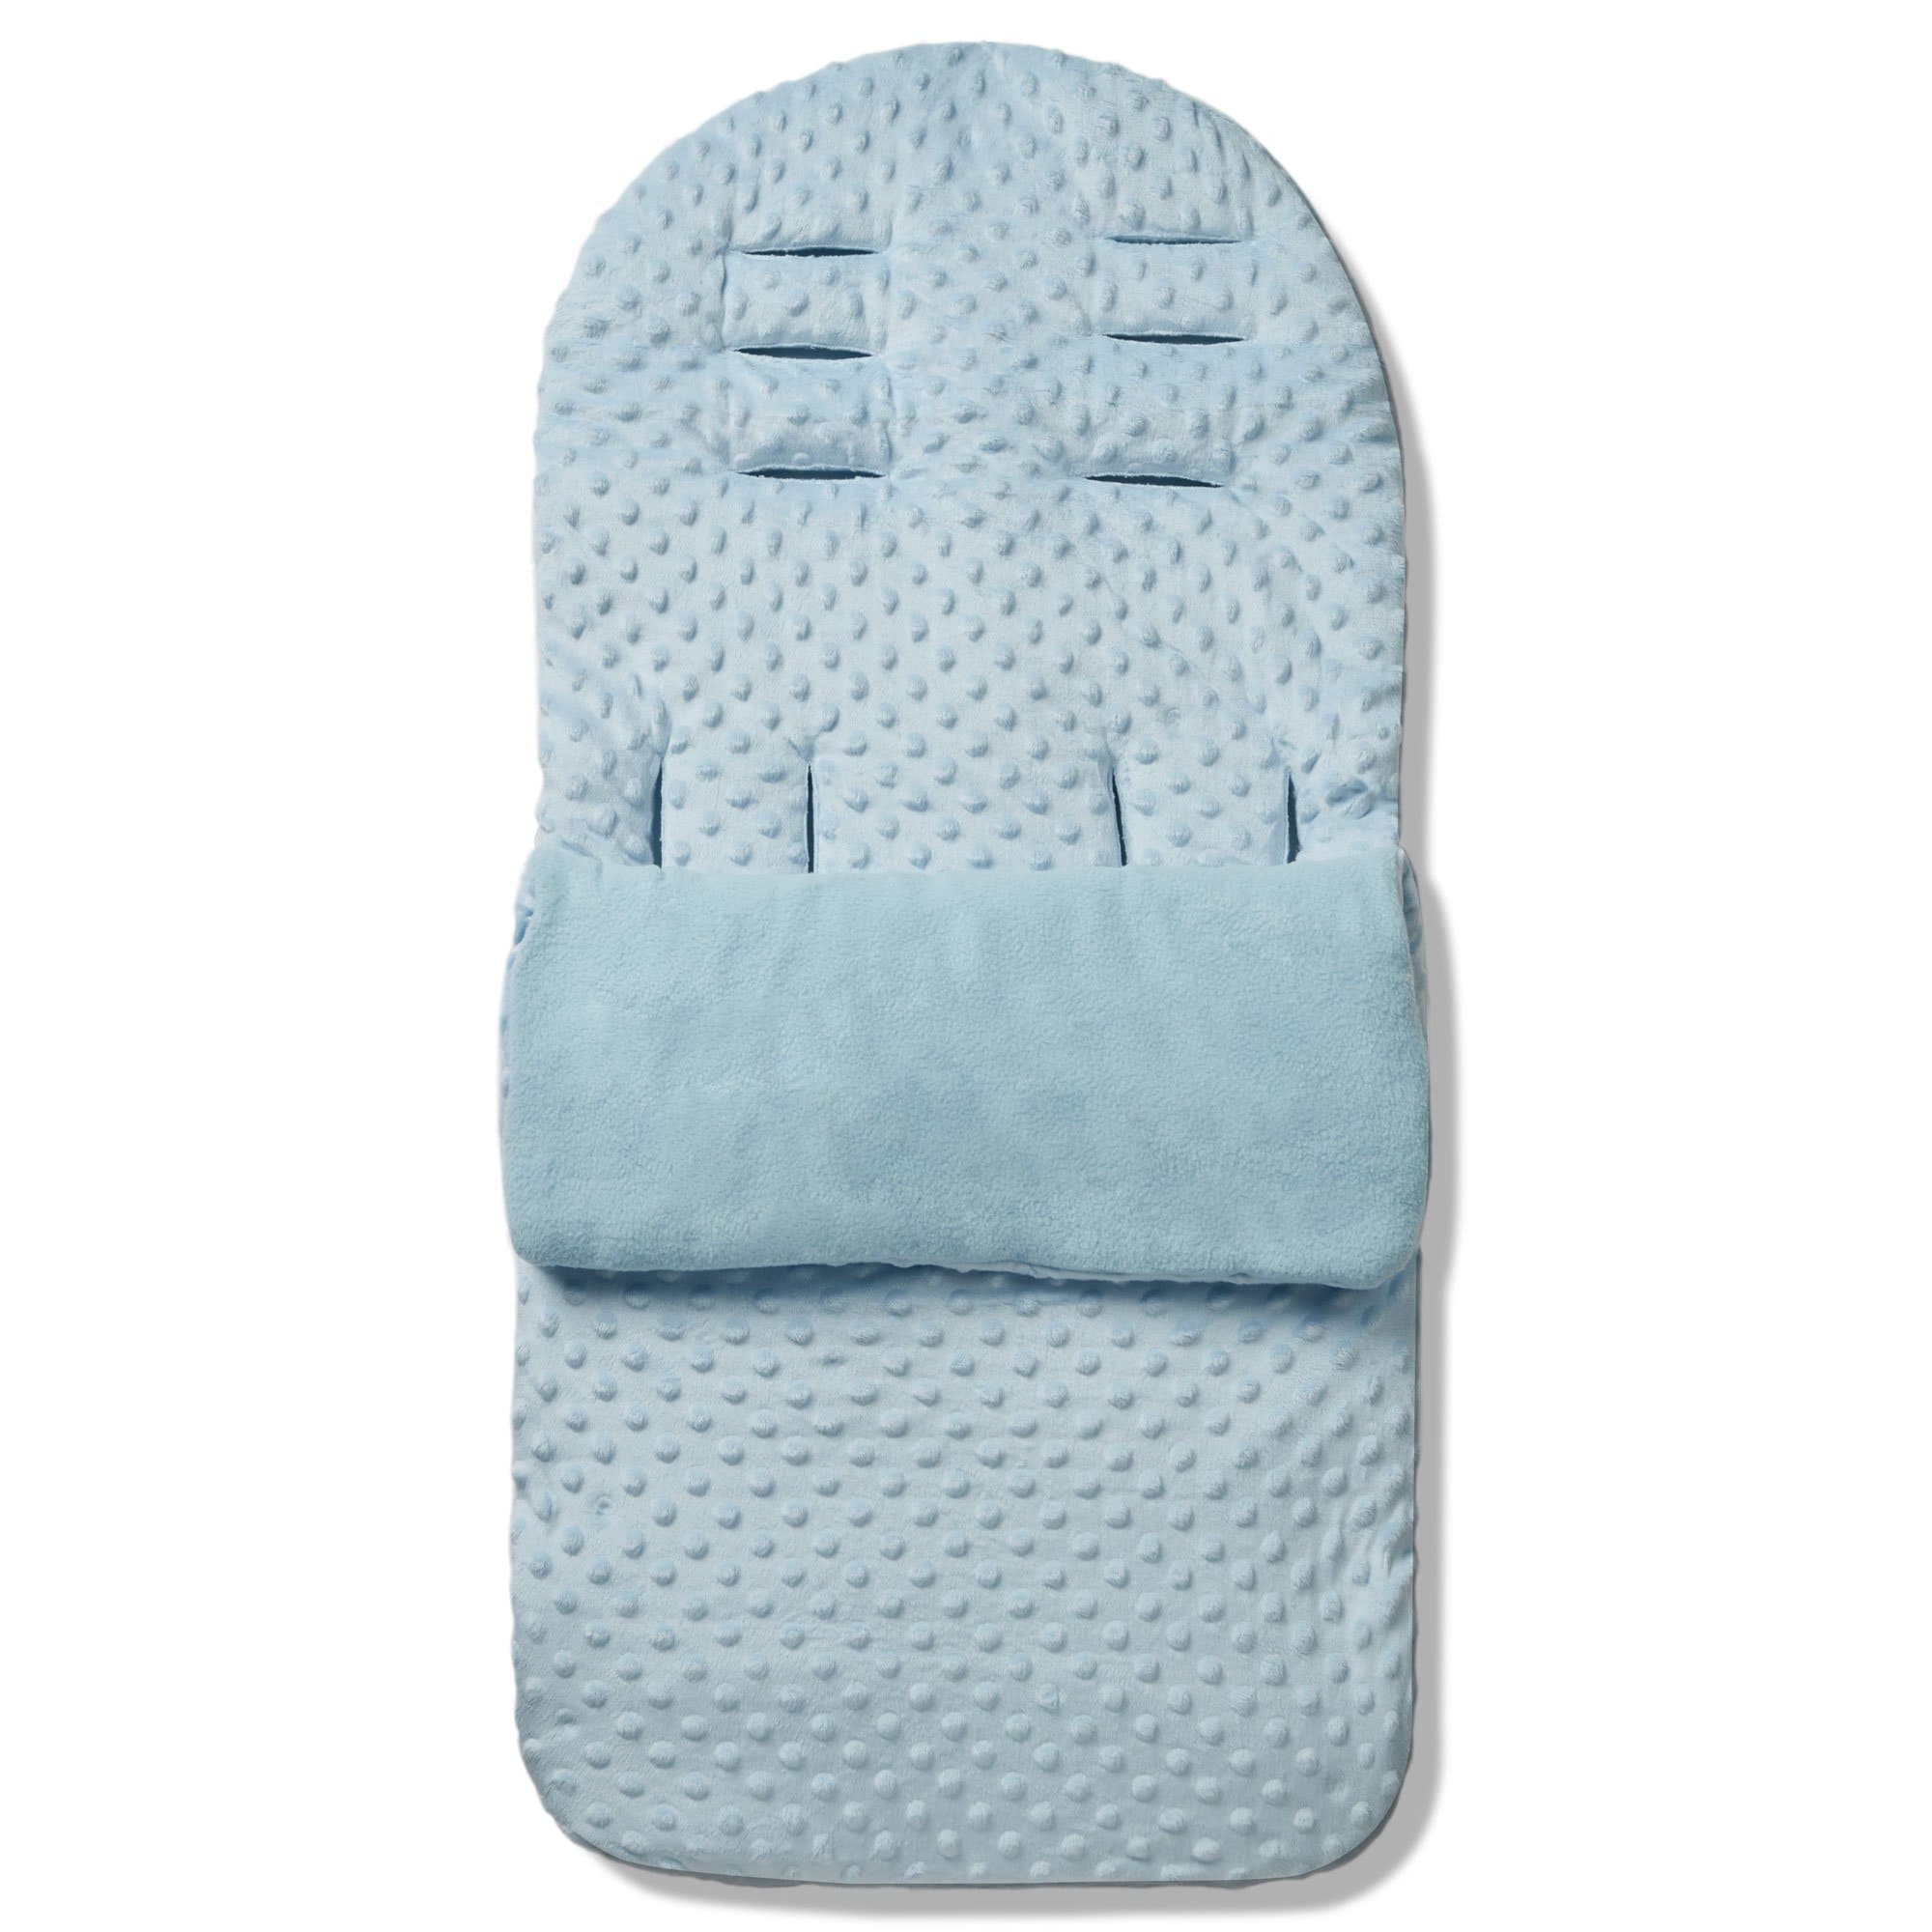 Dimple Footmuff / Cosy Toes Compatible with Brio - For Your Little One